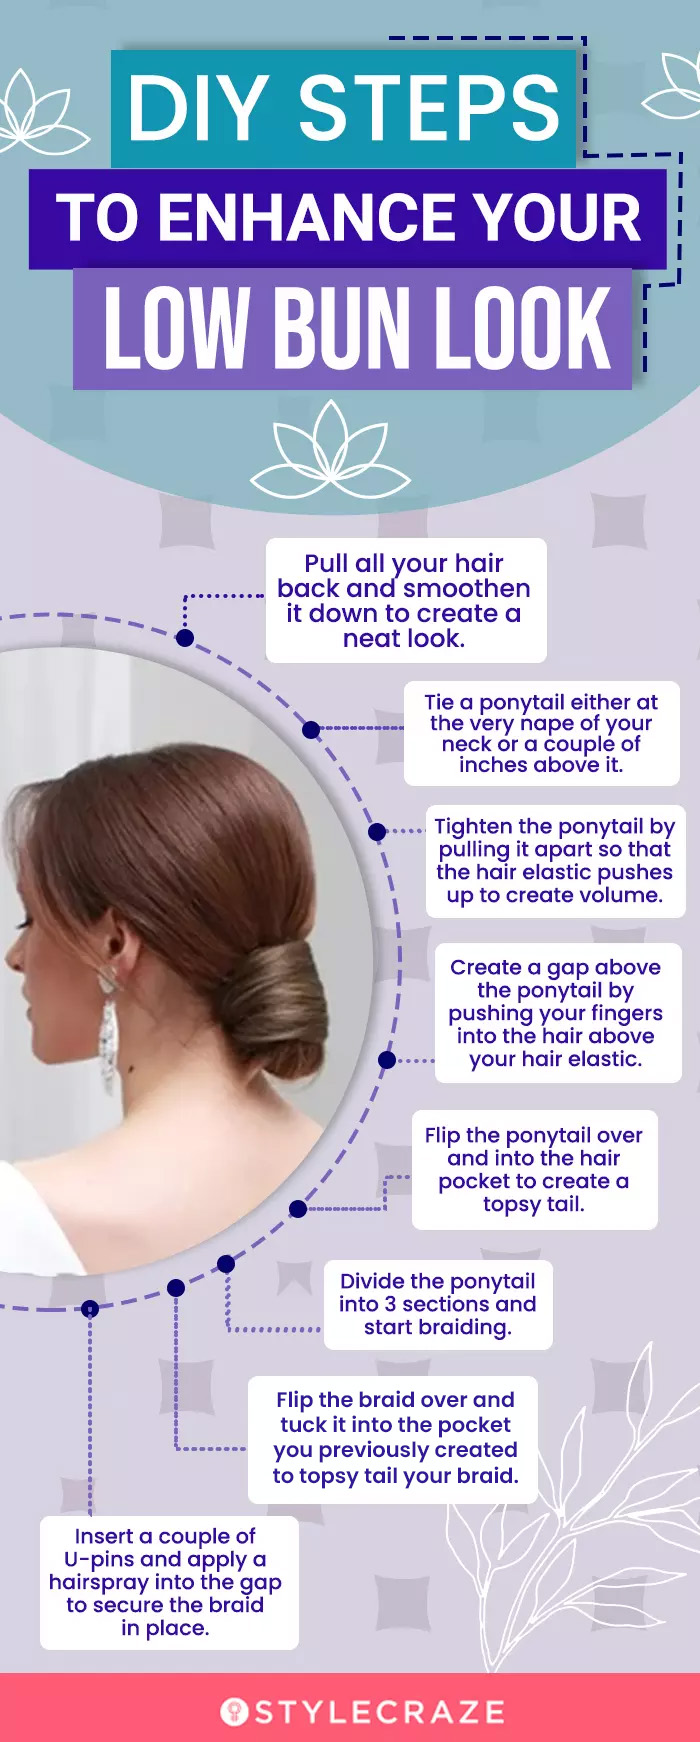 diy steps to enchance your low ben look (infographic)